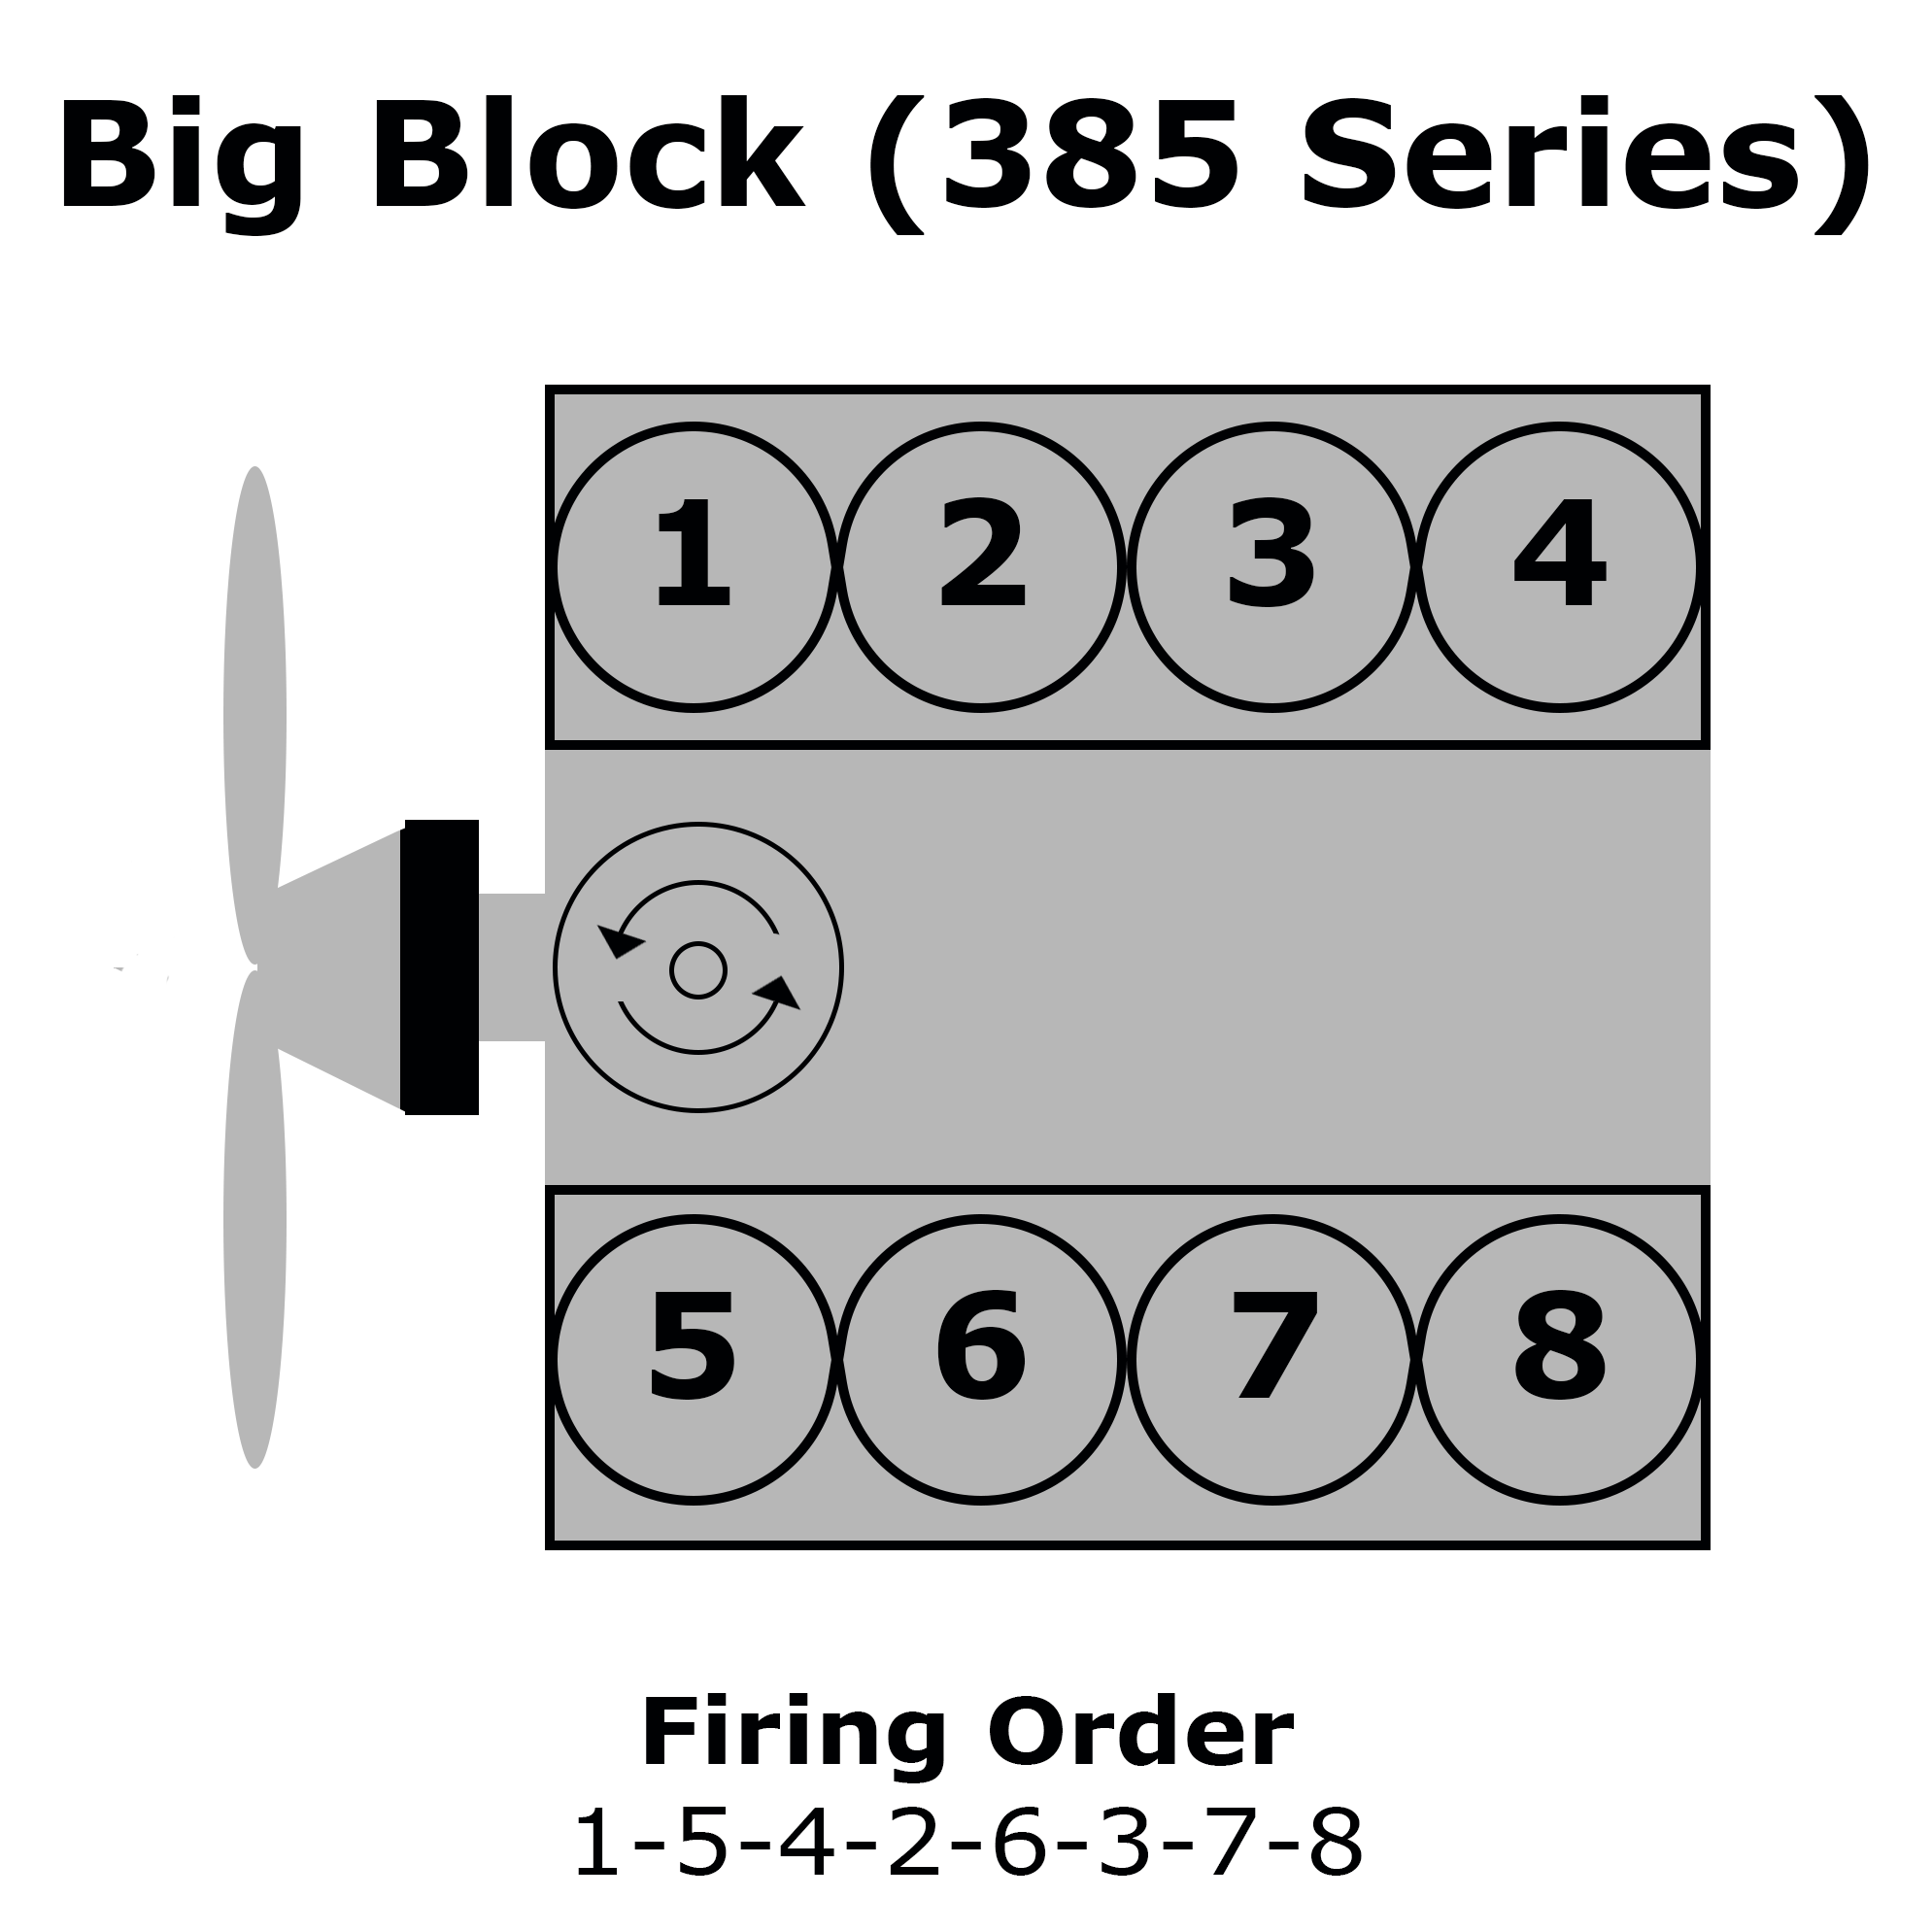 Ford Big Block (385 Series) Cylinder Numbering, Distributor Rotation, and Firing Order